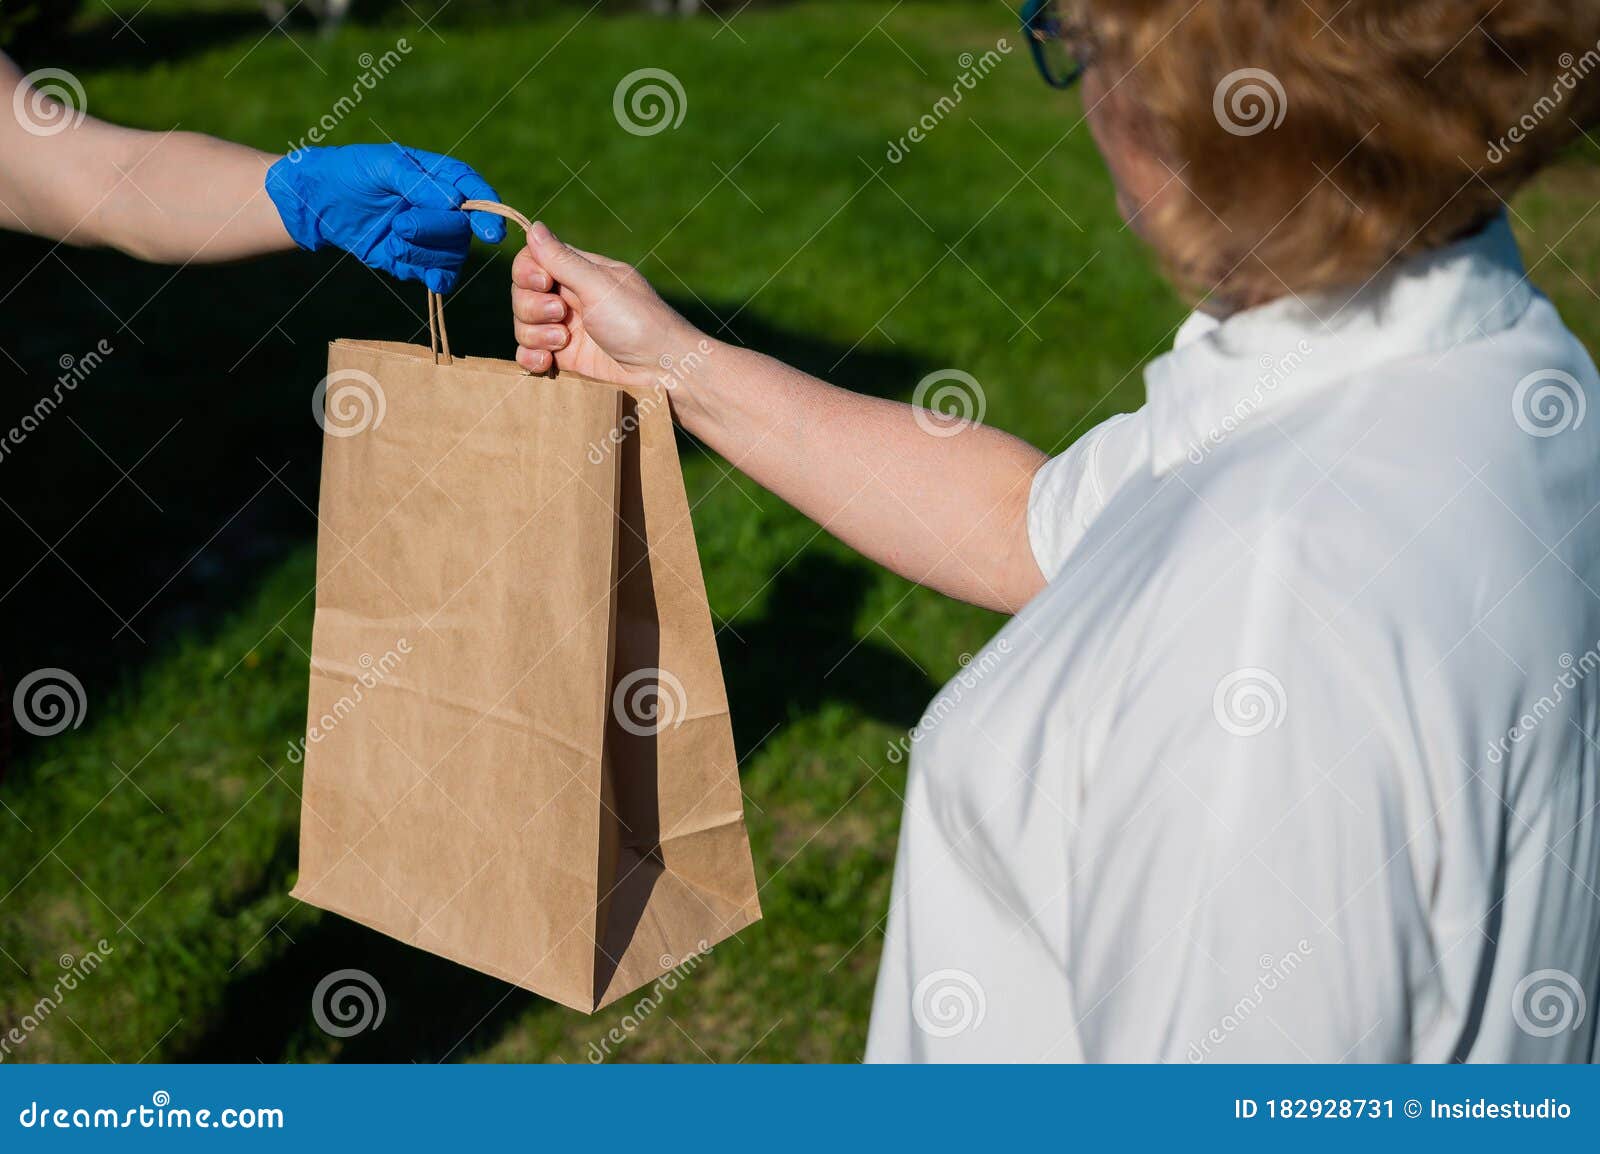 female courier in gloves bringing food package to retired old woman. woman handing a paper bag with groceries to a